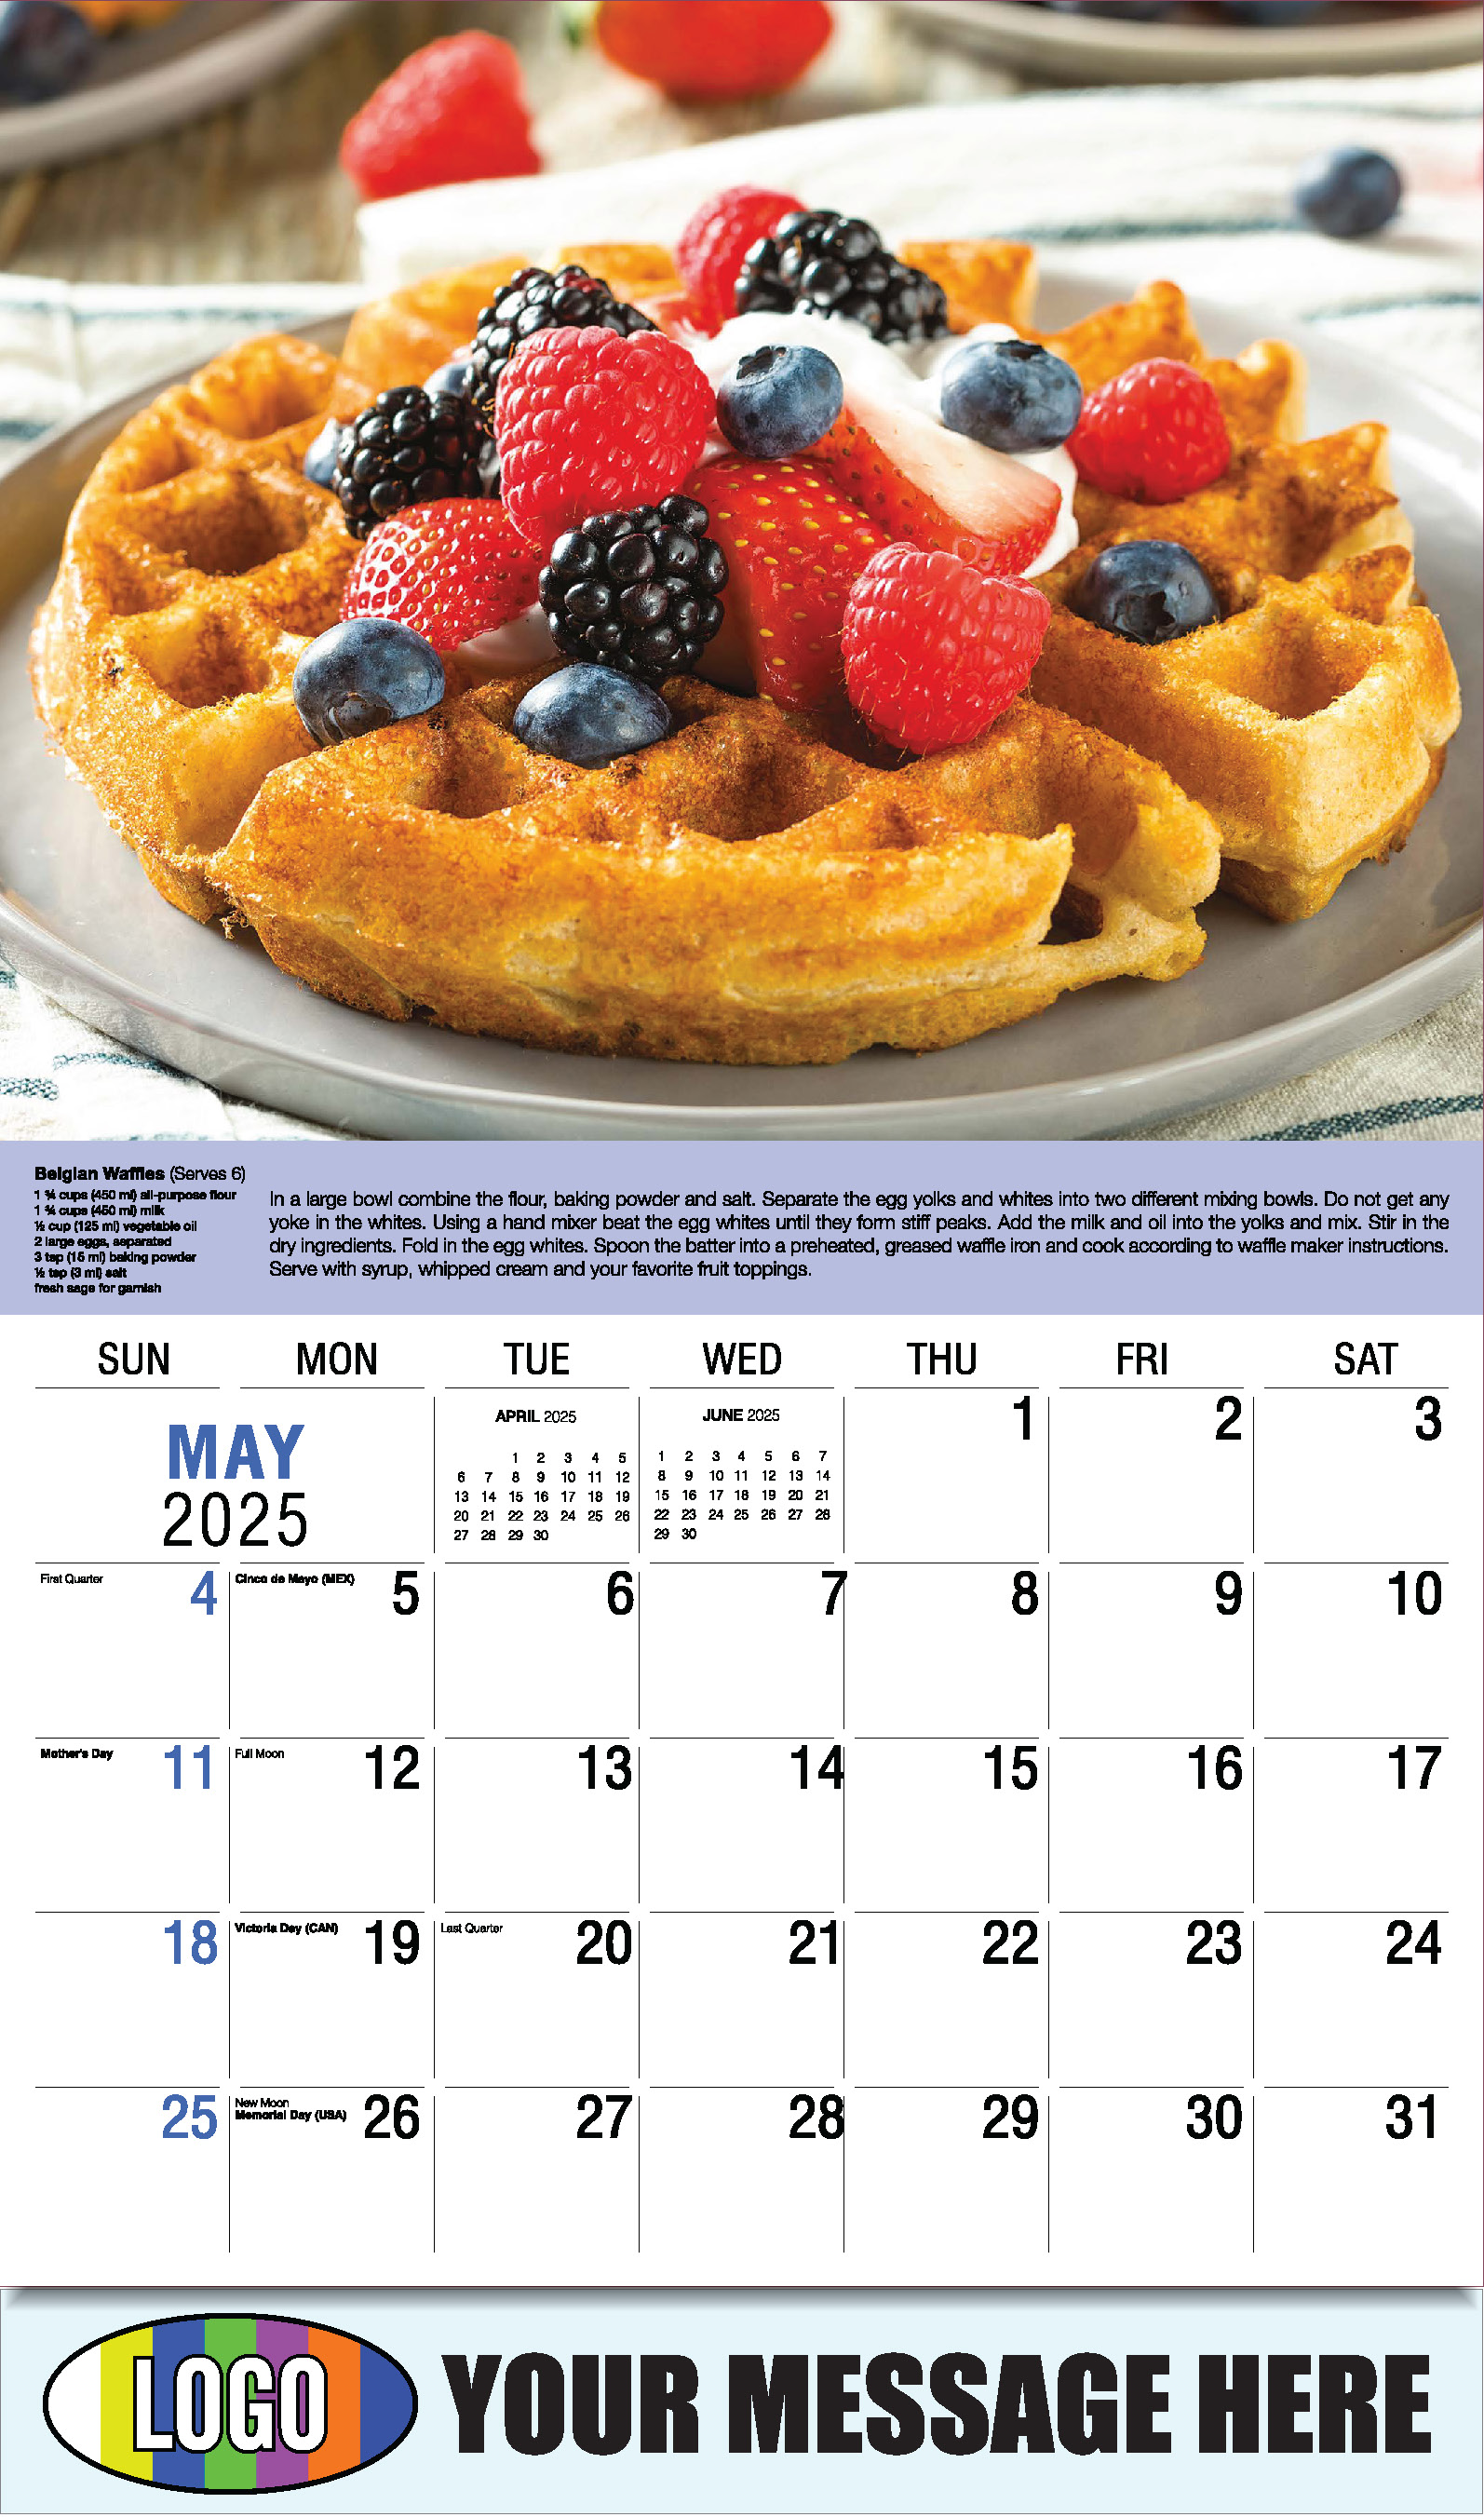 Recipes 2025 Business Promotional Calendar - May